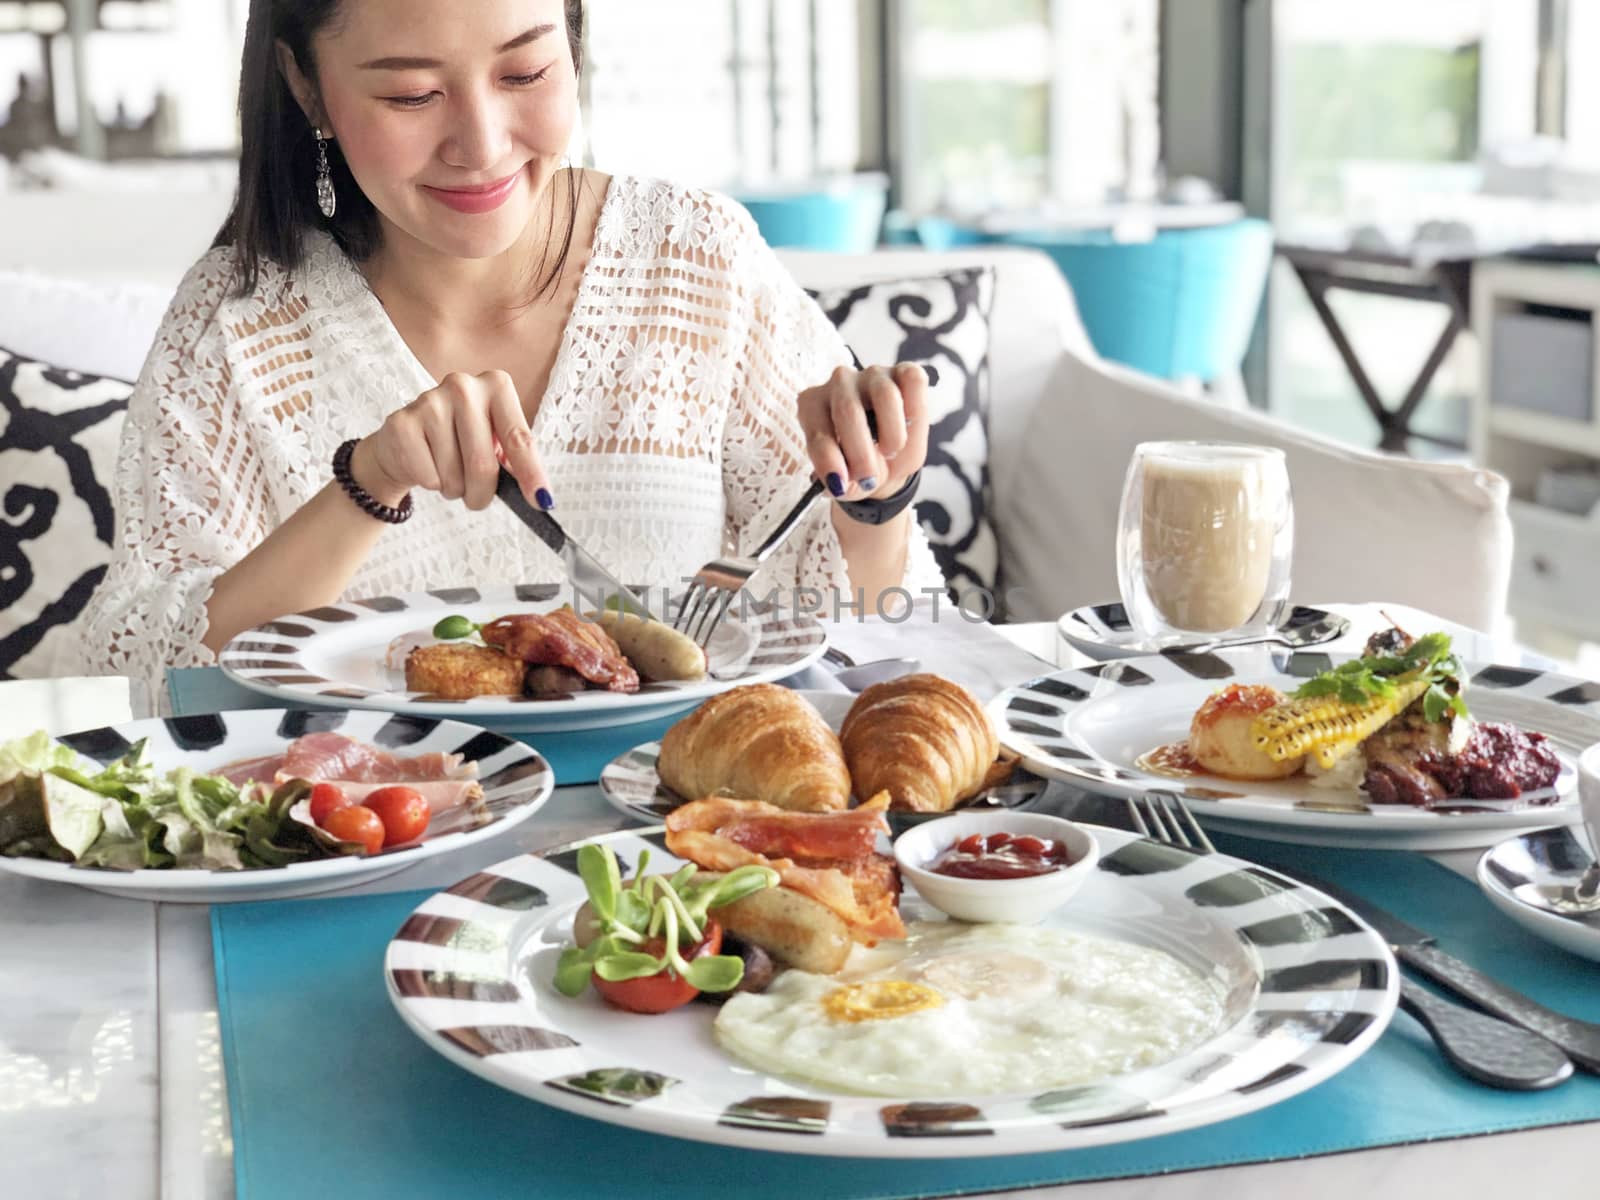 Young woman having healthy breakfast - fried egg, beans, salad,  by Surasak